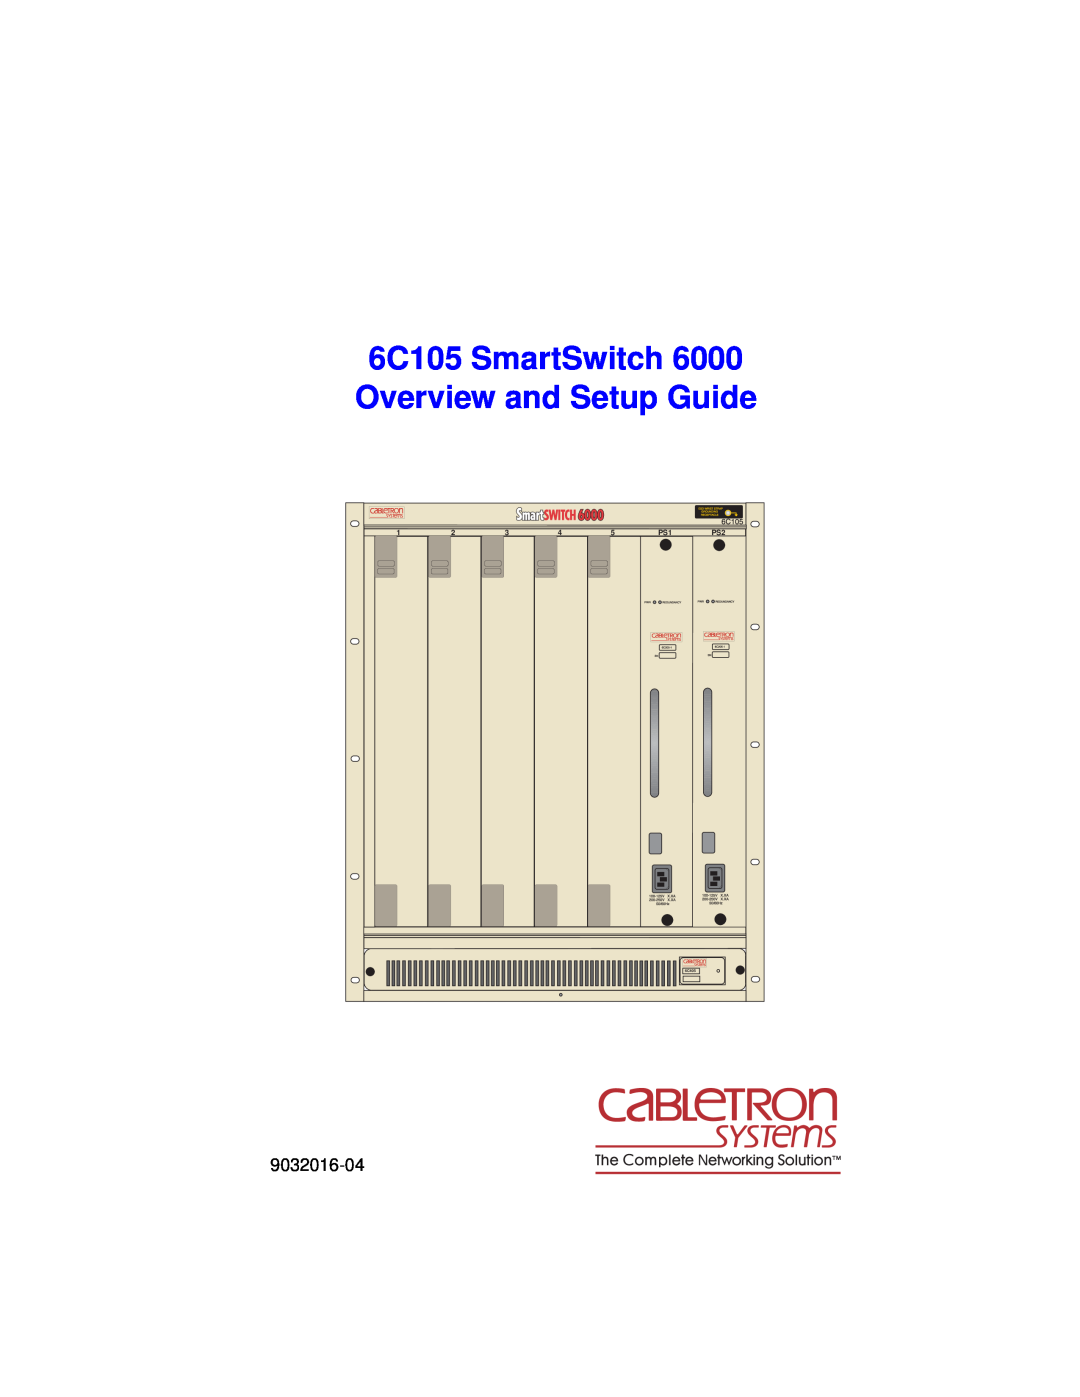 Cabletron Systems setup guide 6C105 SmartSwitch 6000 Overview and Setup Guide, 9032016-04, 6C405 